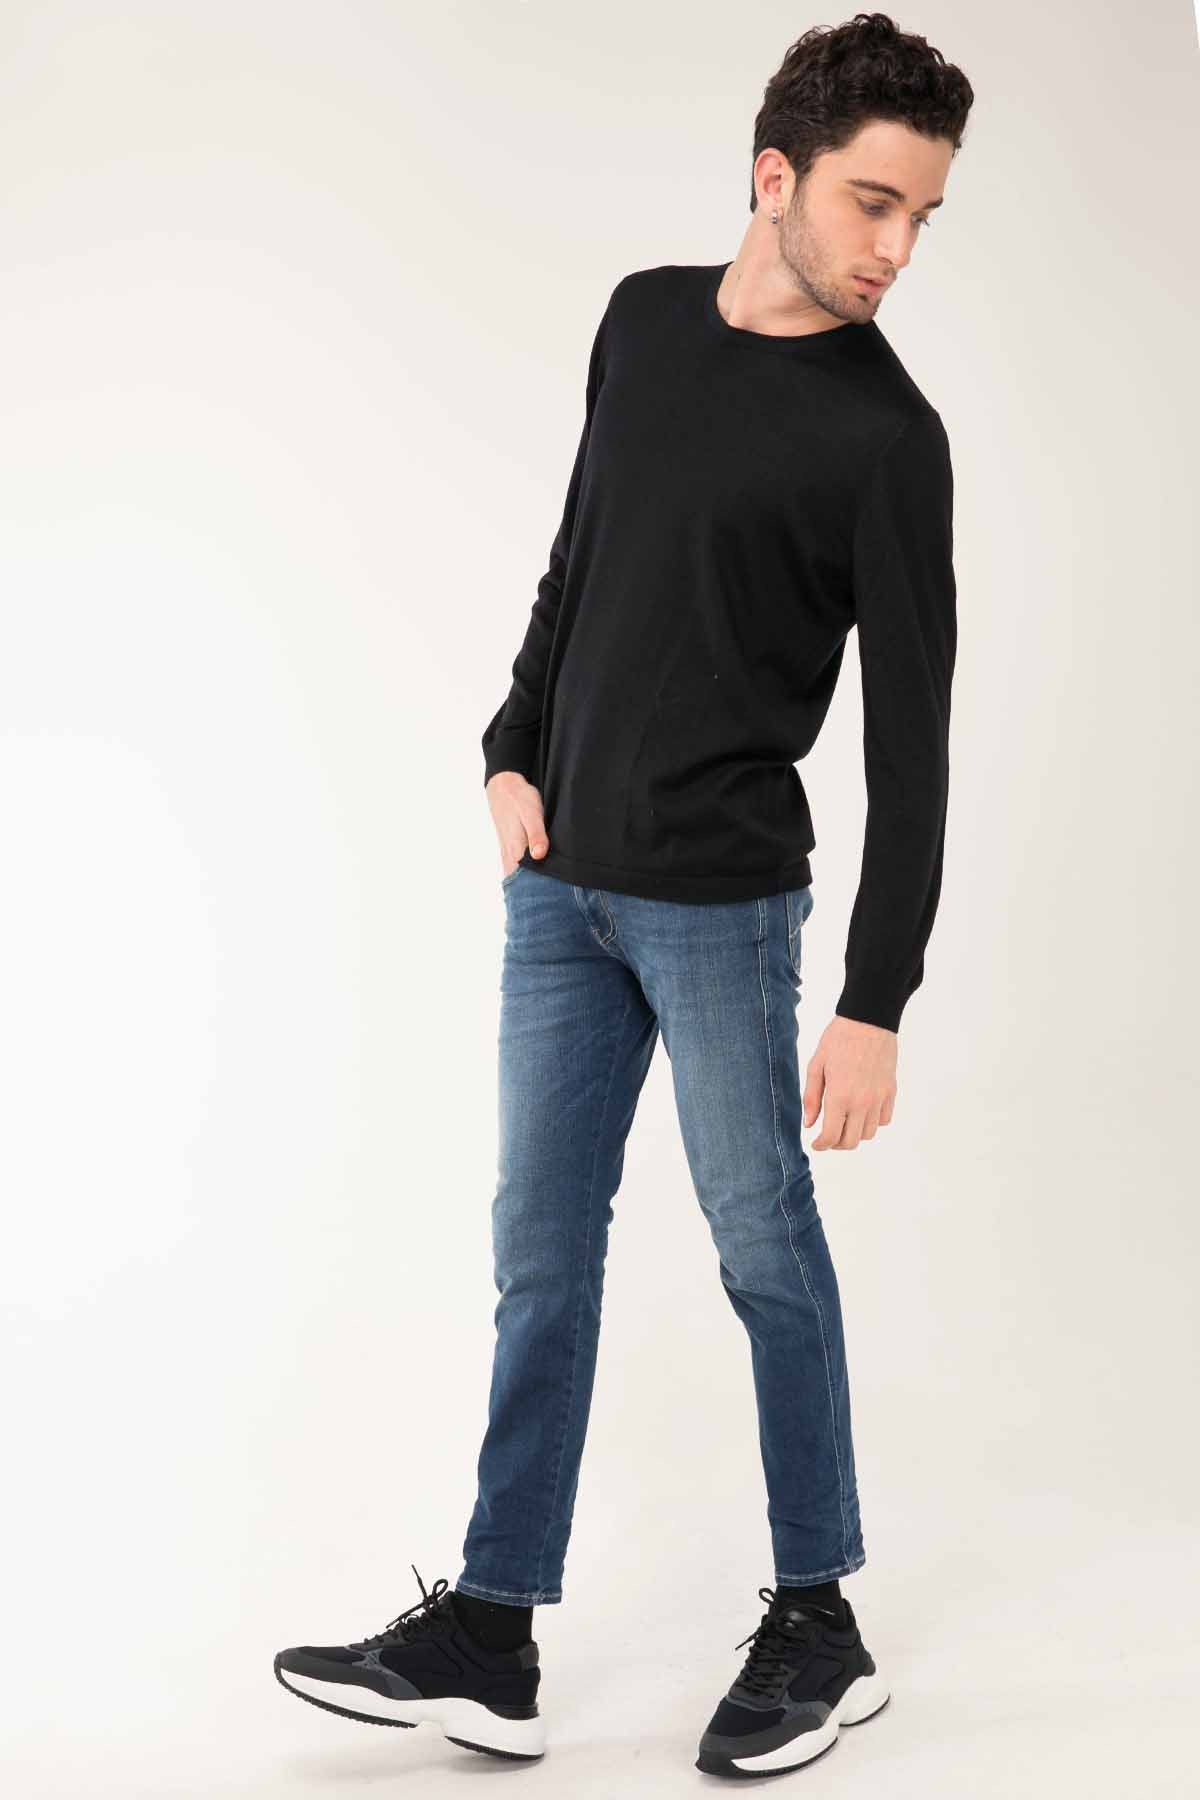 Replay Hyperflex Re-Used Slim Fit Anbass Jeans-Libas Trendy Fashion Store